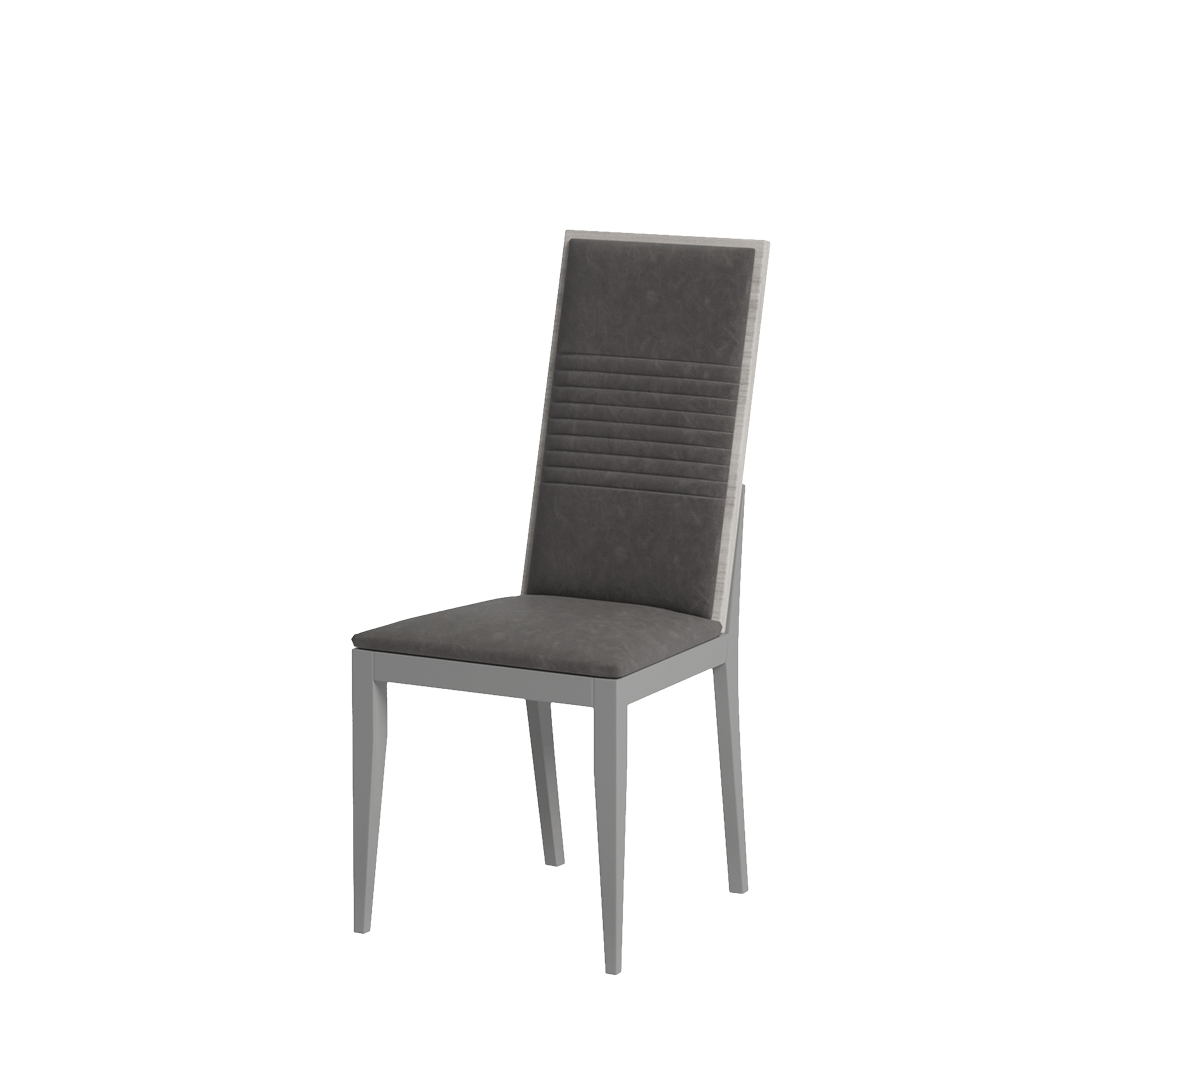 Brands Status Modern Collections, Italy Mia Chair